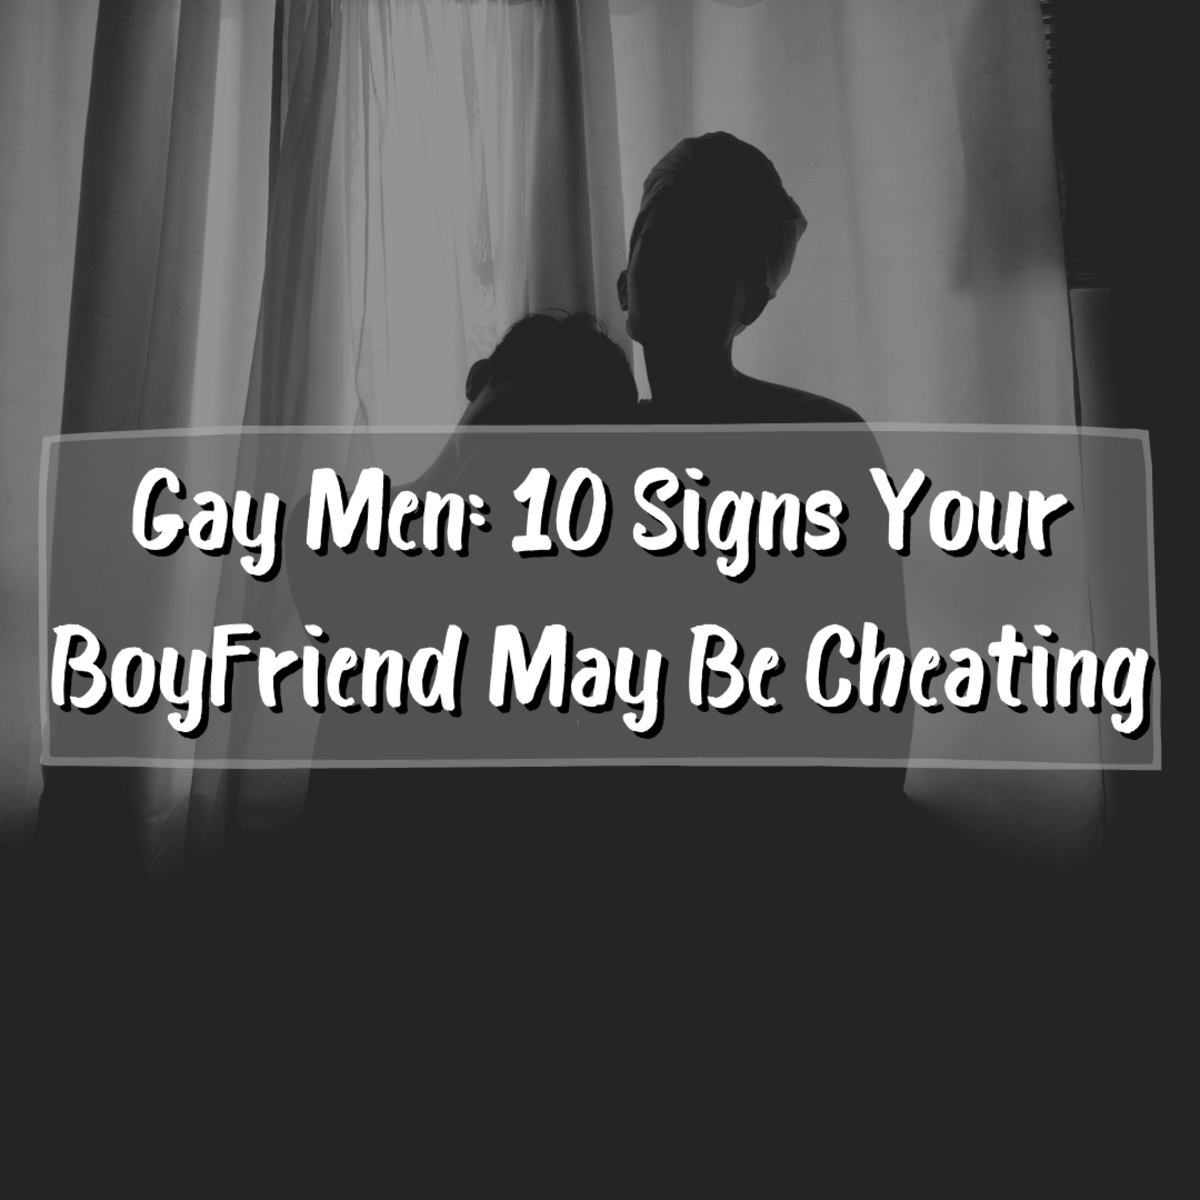 Do you suspect your boyfriend is cheating?  Learn how to read both the obvious and subtle signs.